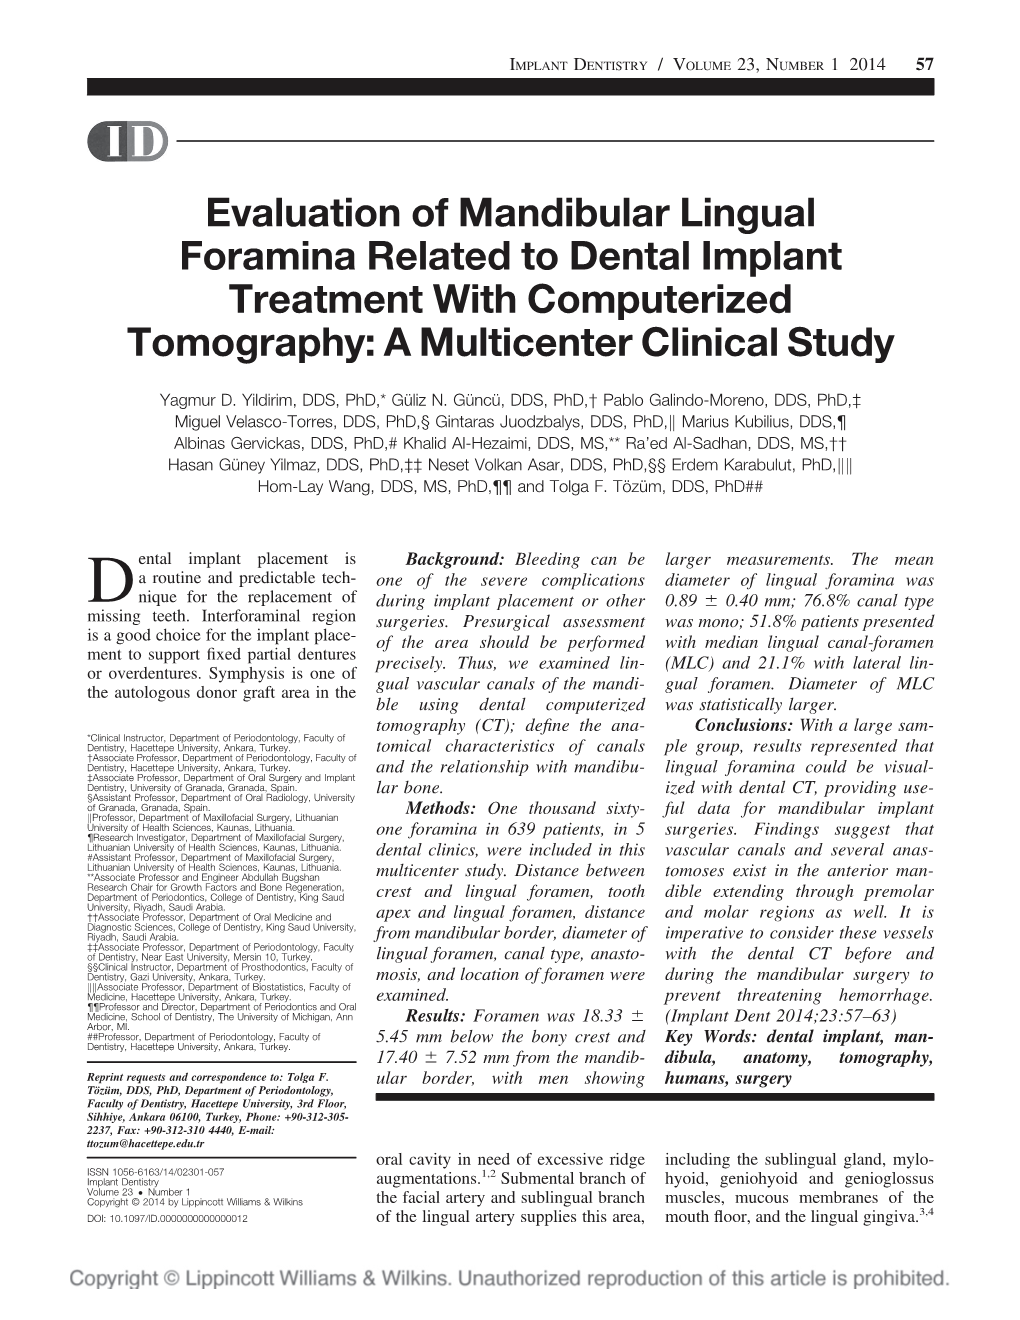 Evaluation of Mandibular Lingual Foramina Related to Dental Implant Treatment with Computerized Tomography: a Multicenter Clinical Study